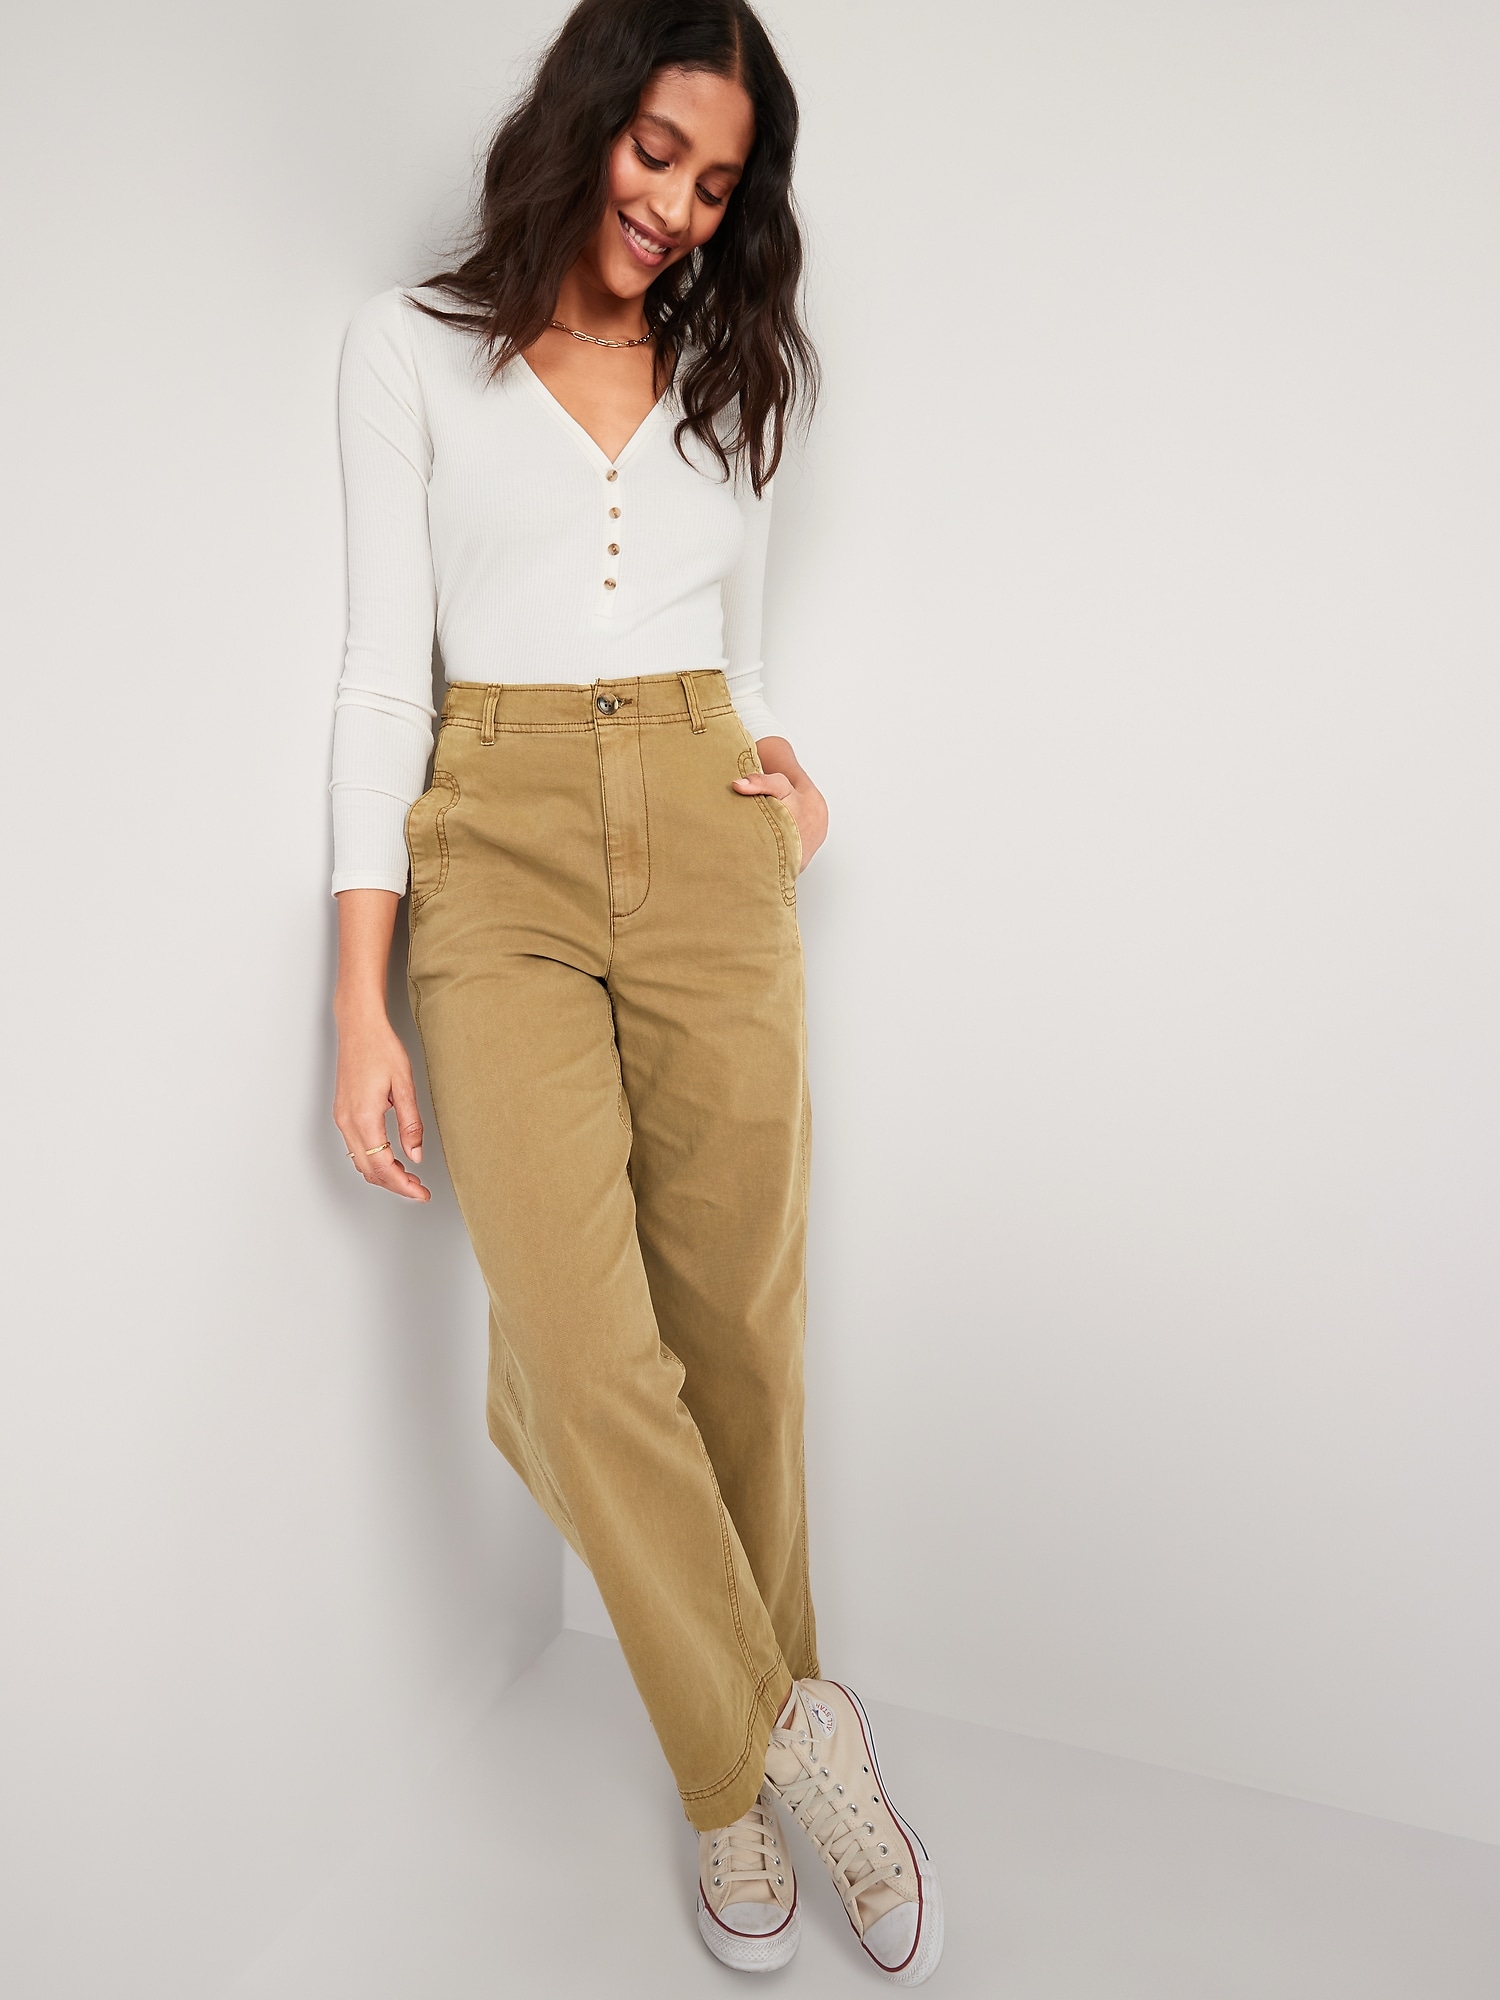 Women Stretchy Straight Leg Pants Comfy Solid Classic High Waisted Wide Leg  Long Bootcut Pant Slacks Work Office Pants In Stock